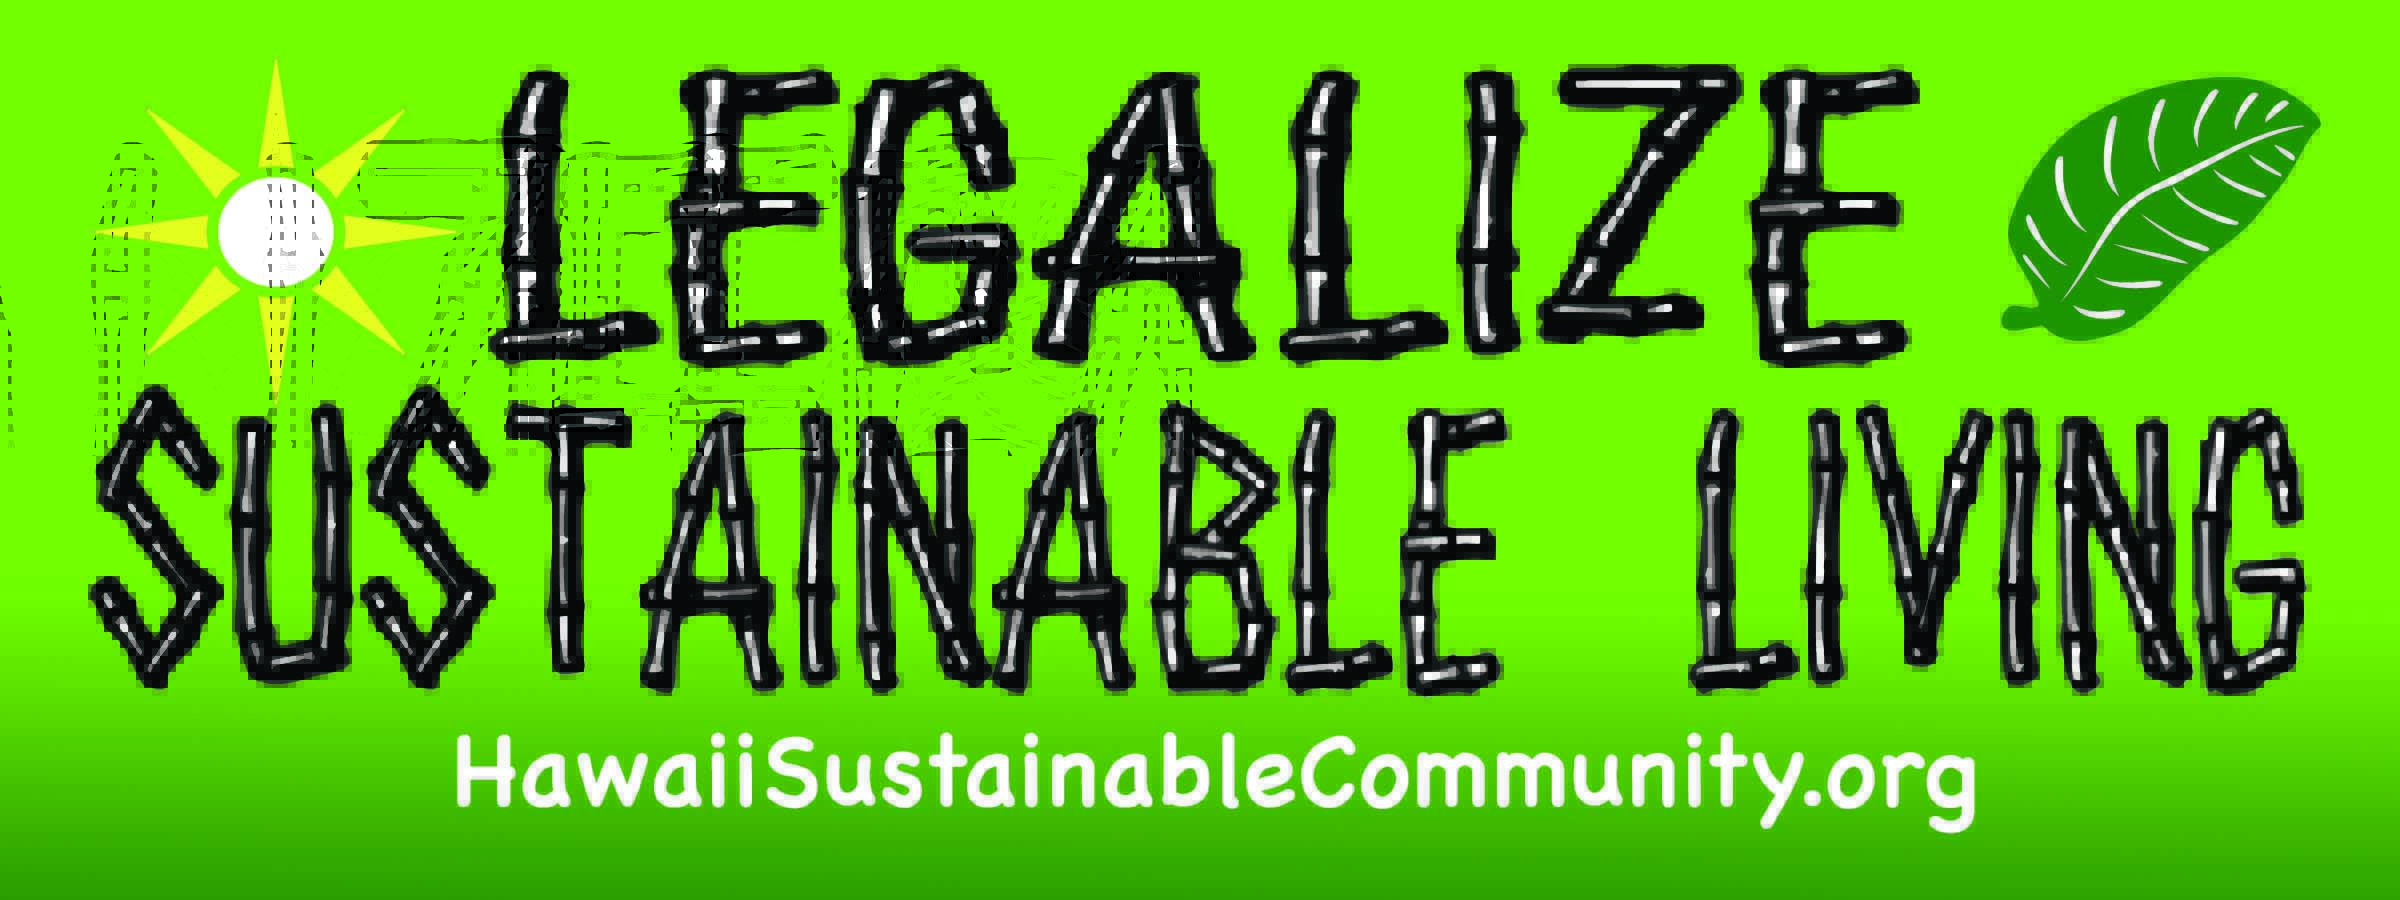 Legalize Sustainable Living bumper sticker - Hawaii Sustainable Community .org